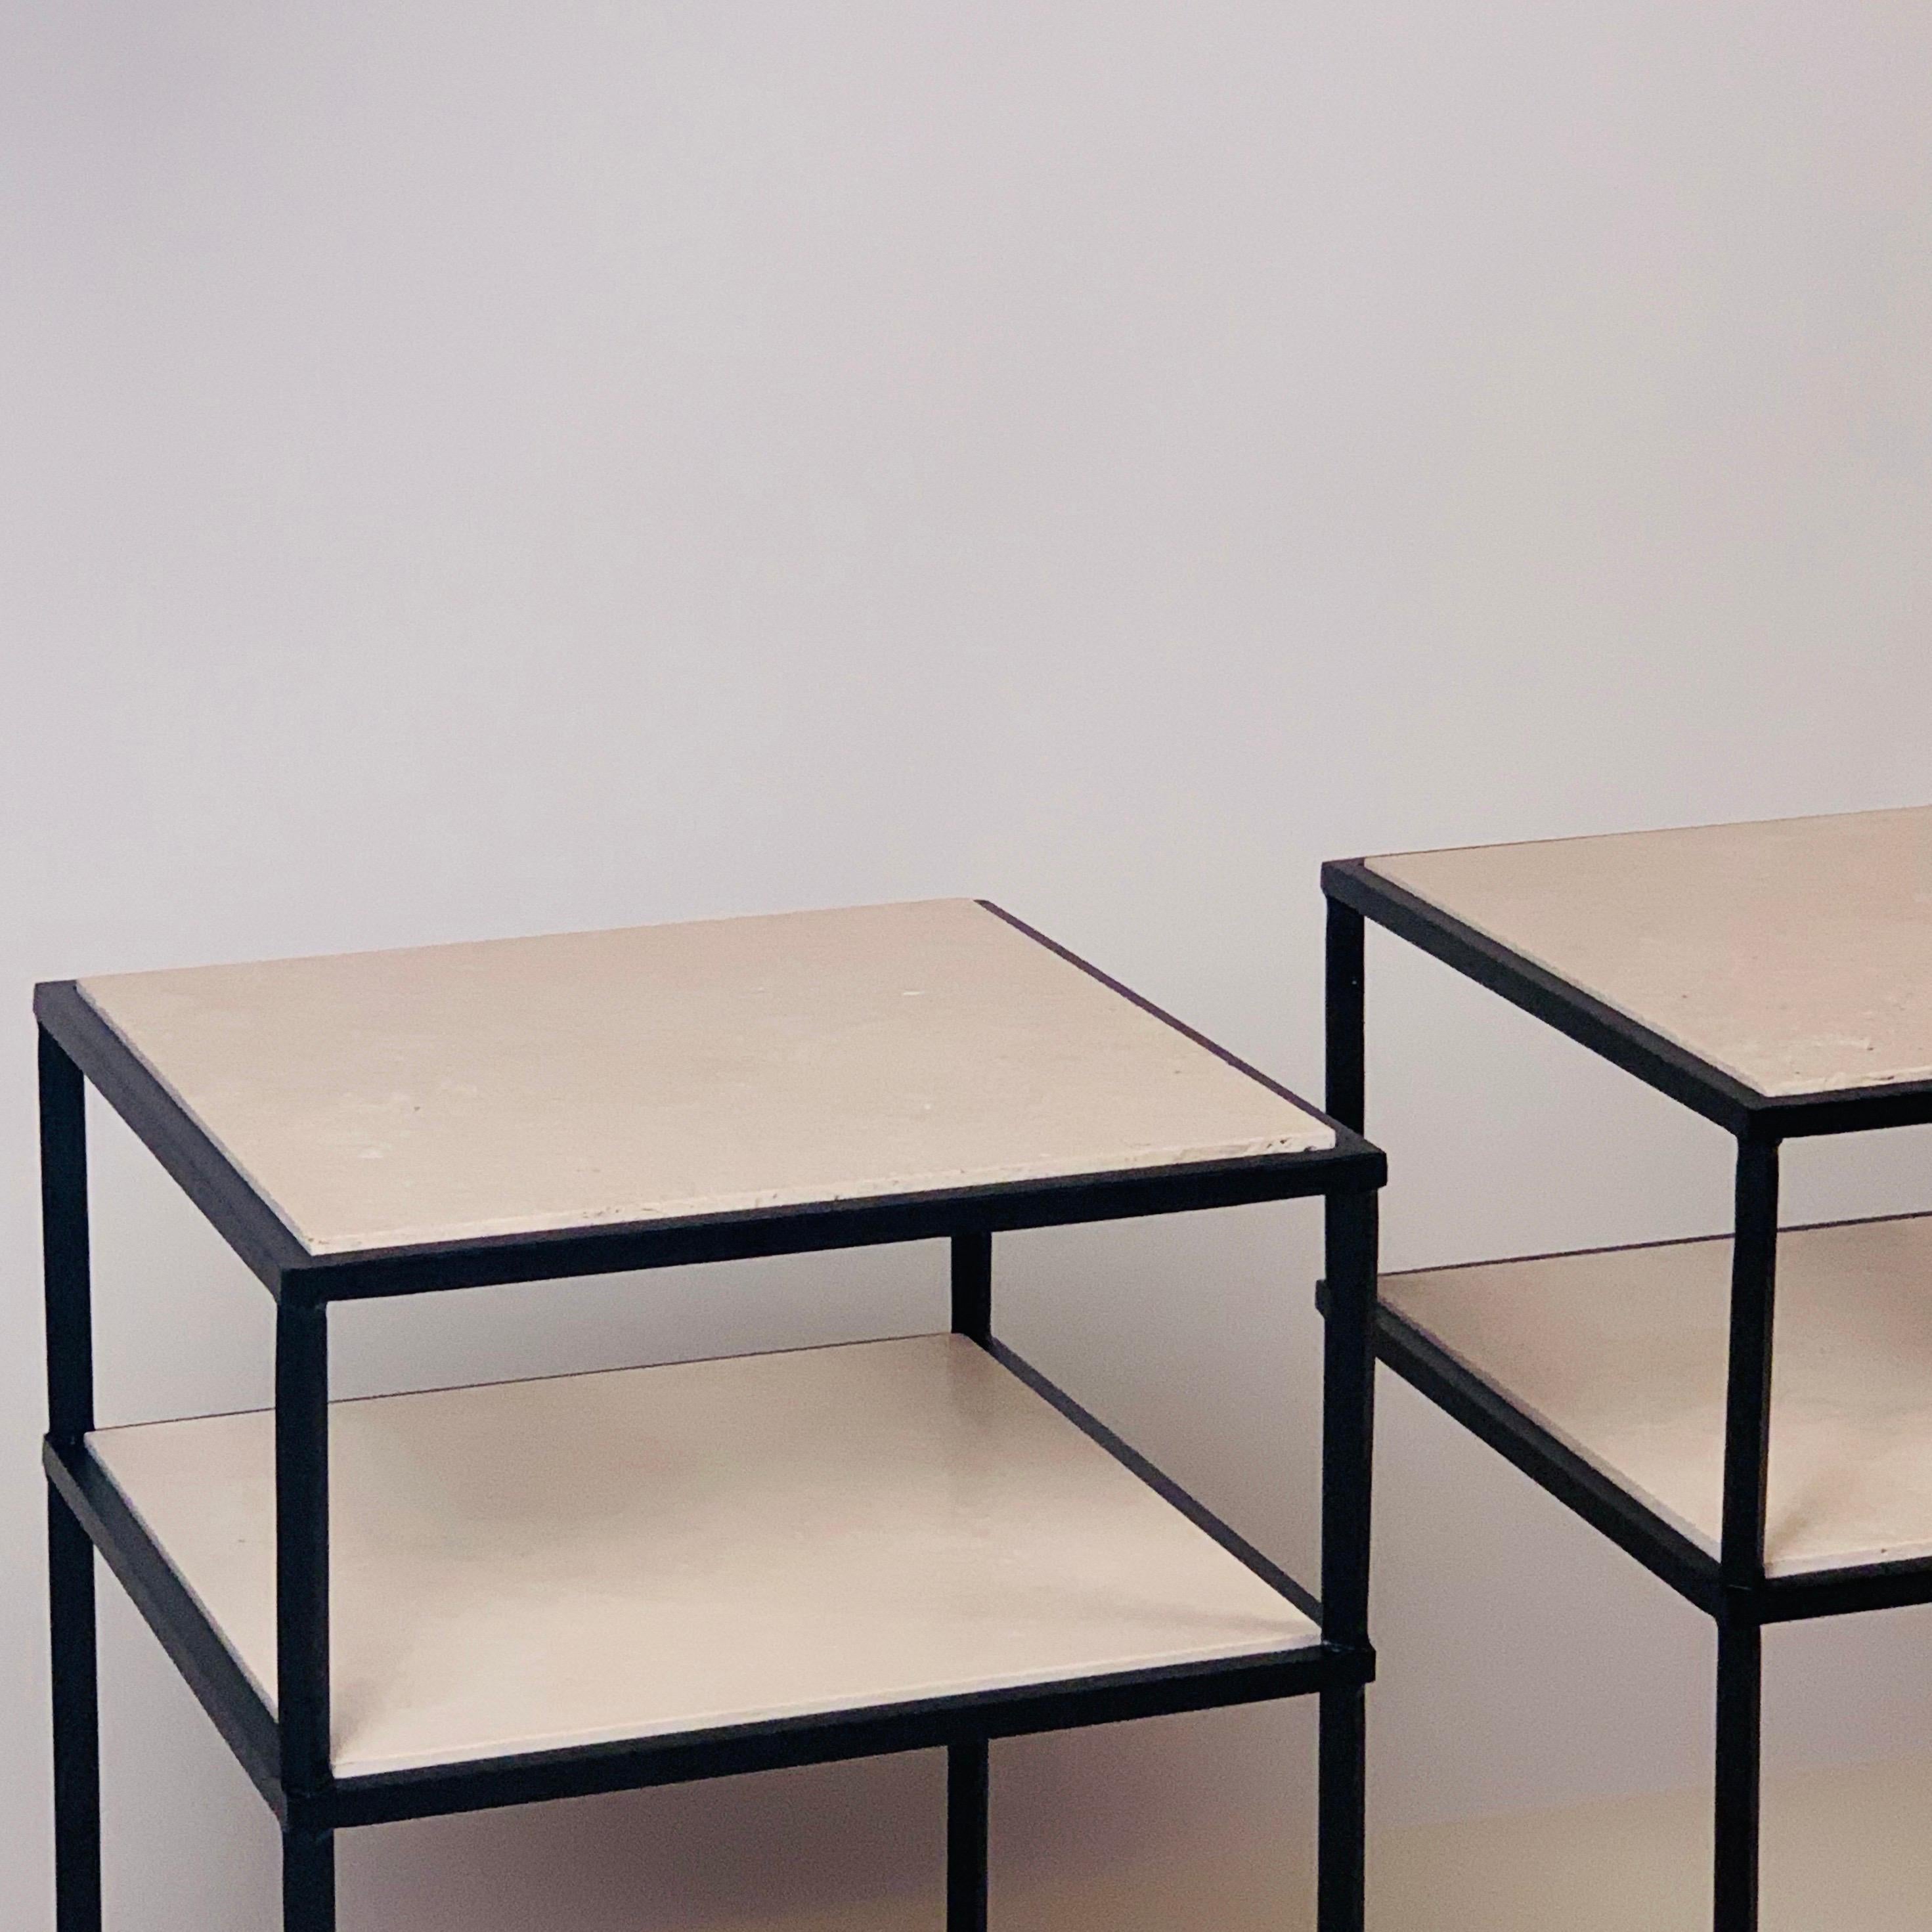 Polished In-Stock Pair of 2-Tier Entretoise Side Tables by Design Frères For Sale